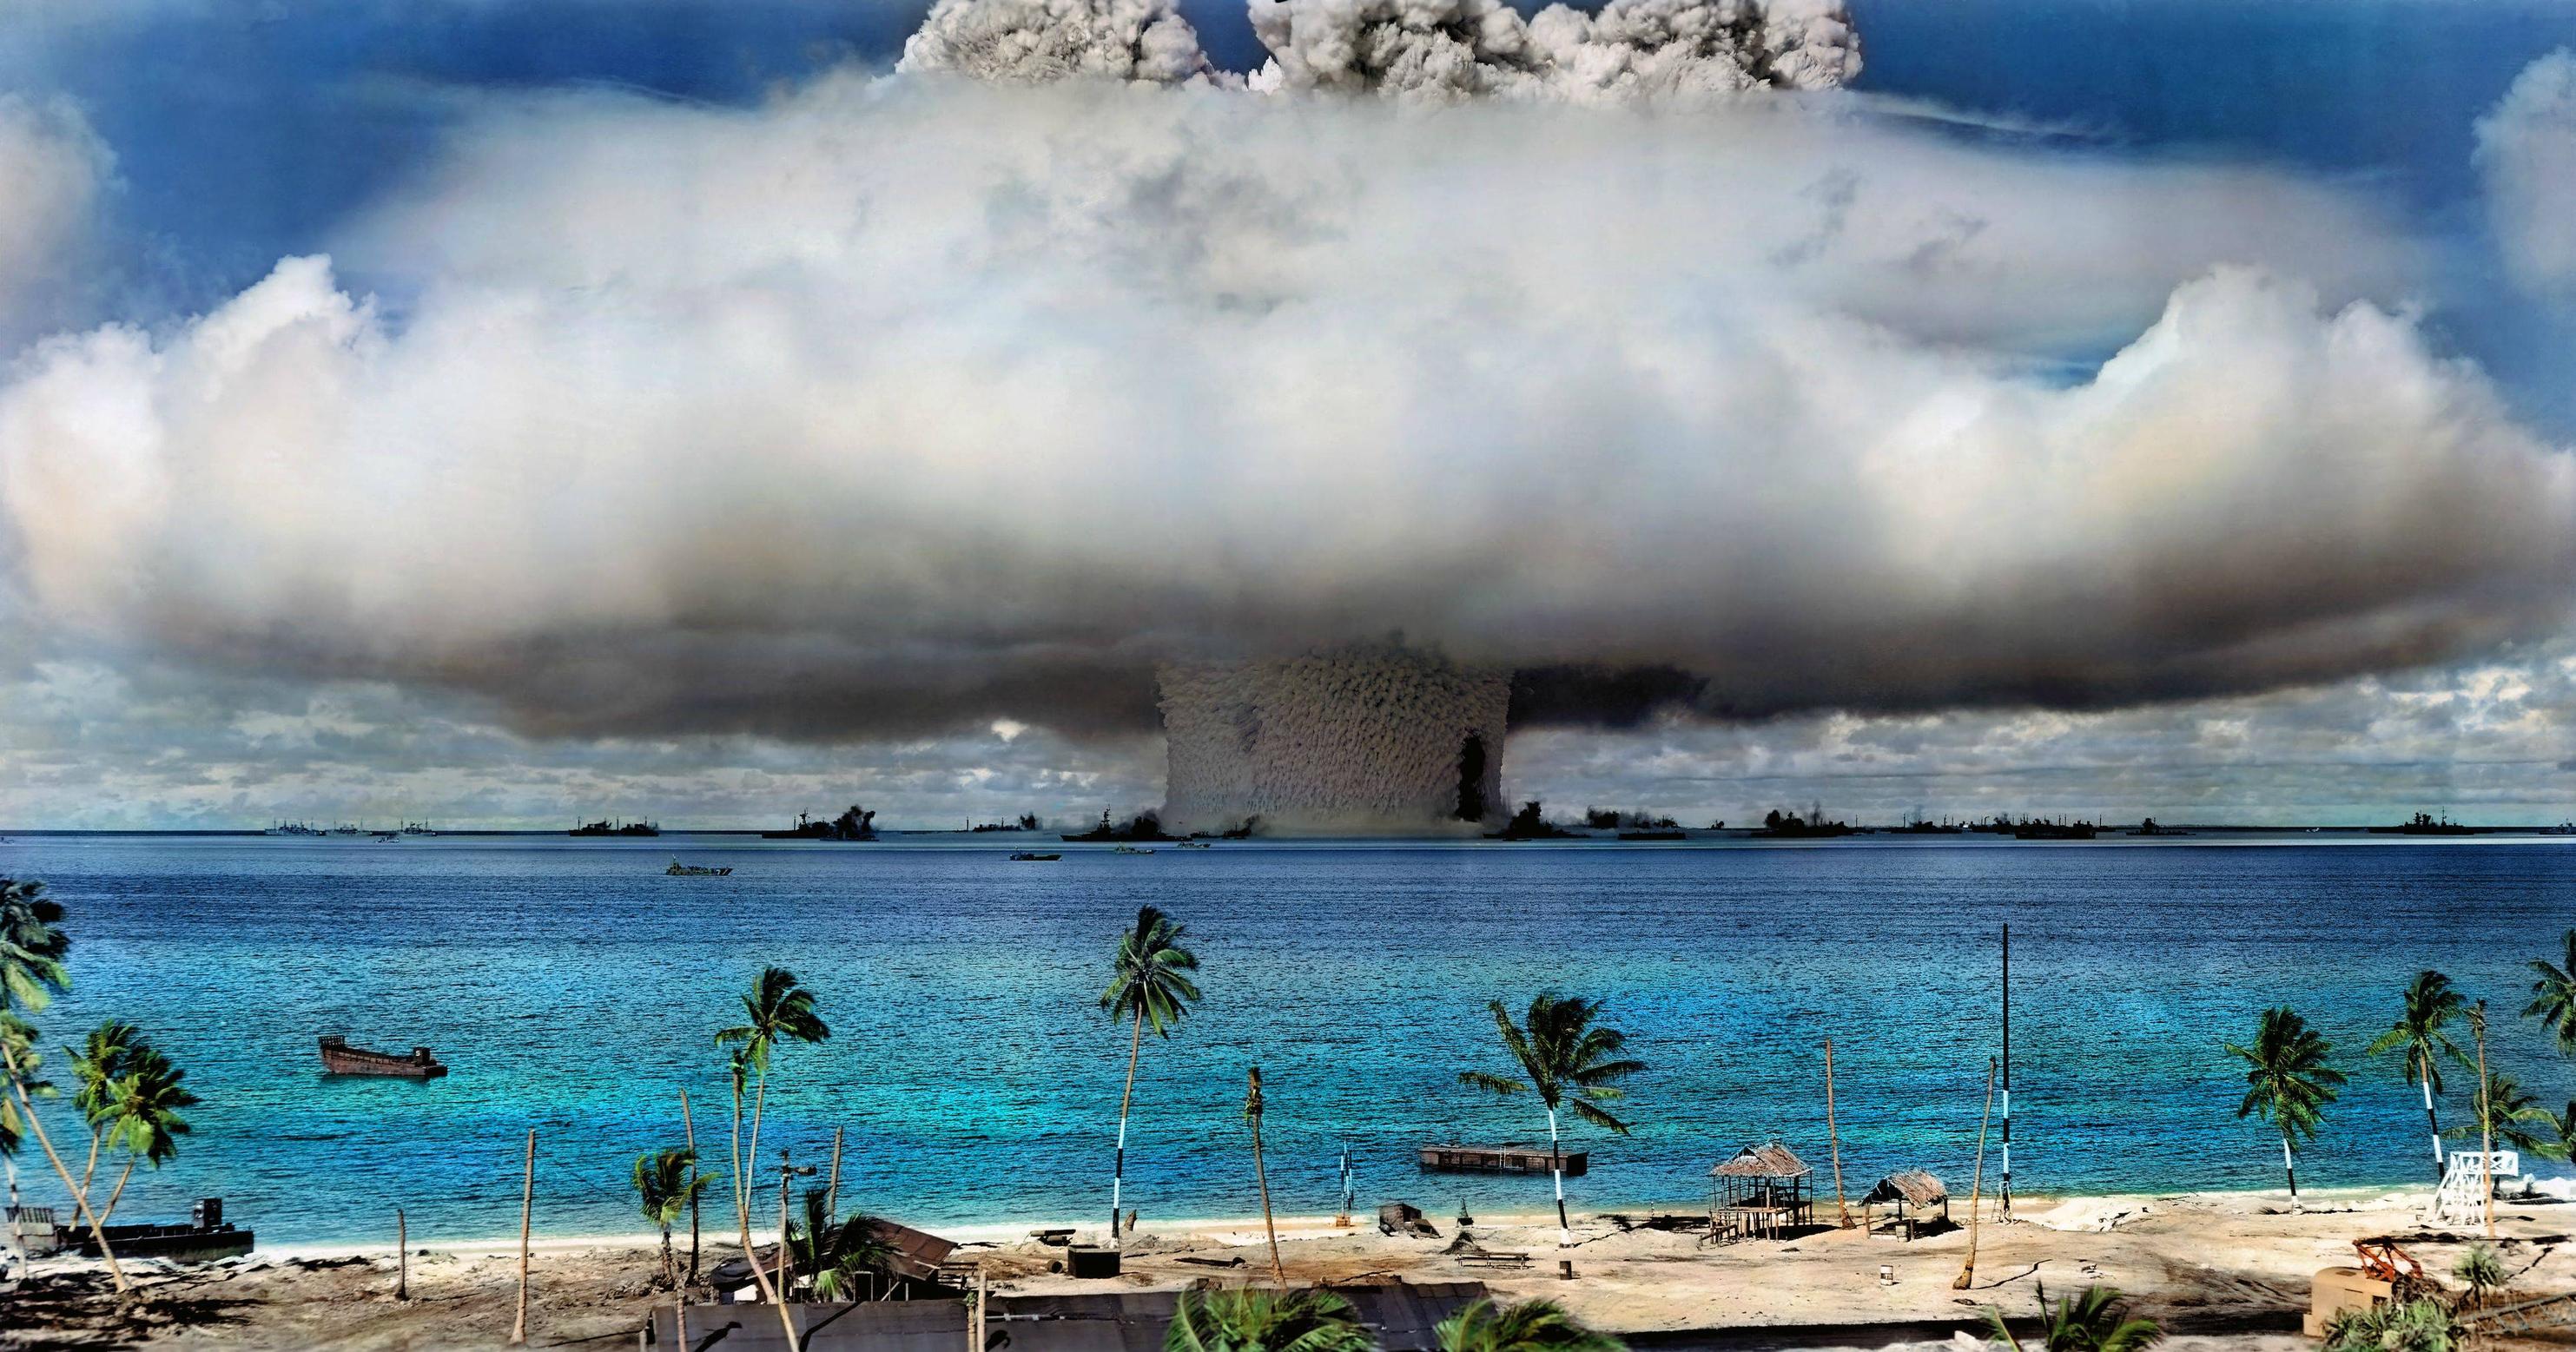 Nuclear Nature Water Trees Beach Explosion Palm Trees Colorized Photos 2966x1557